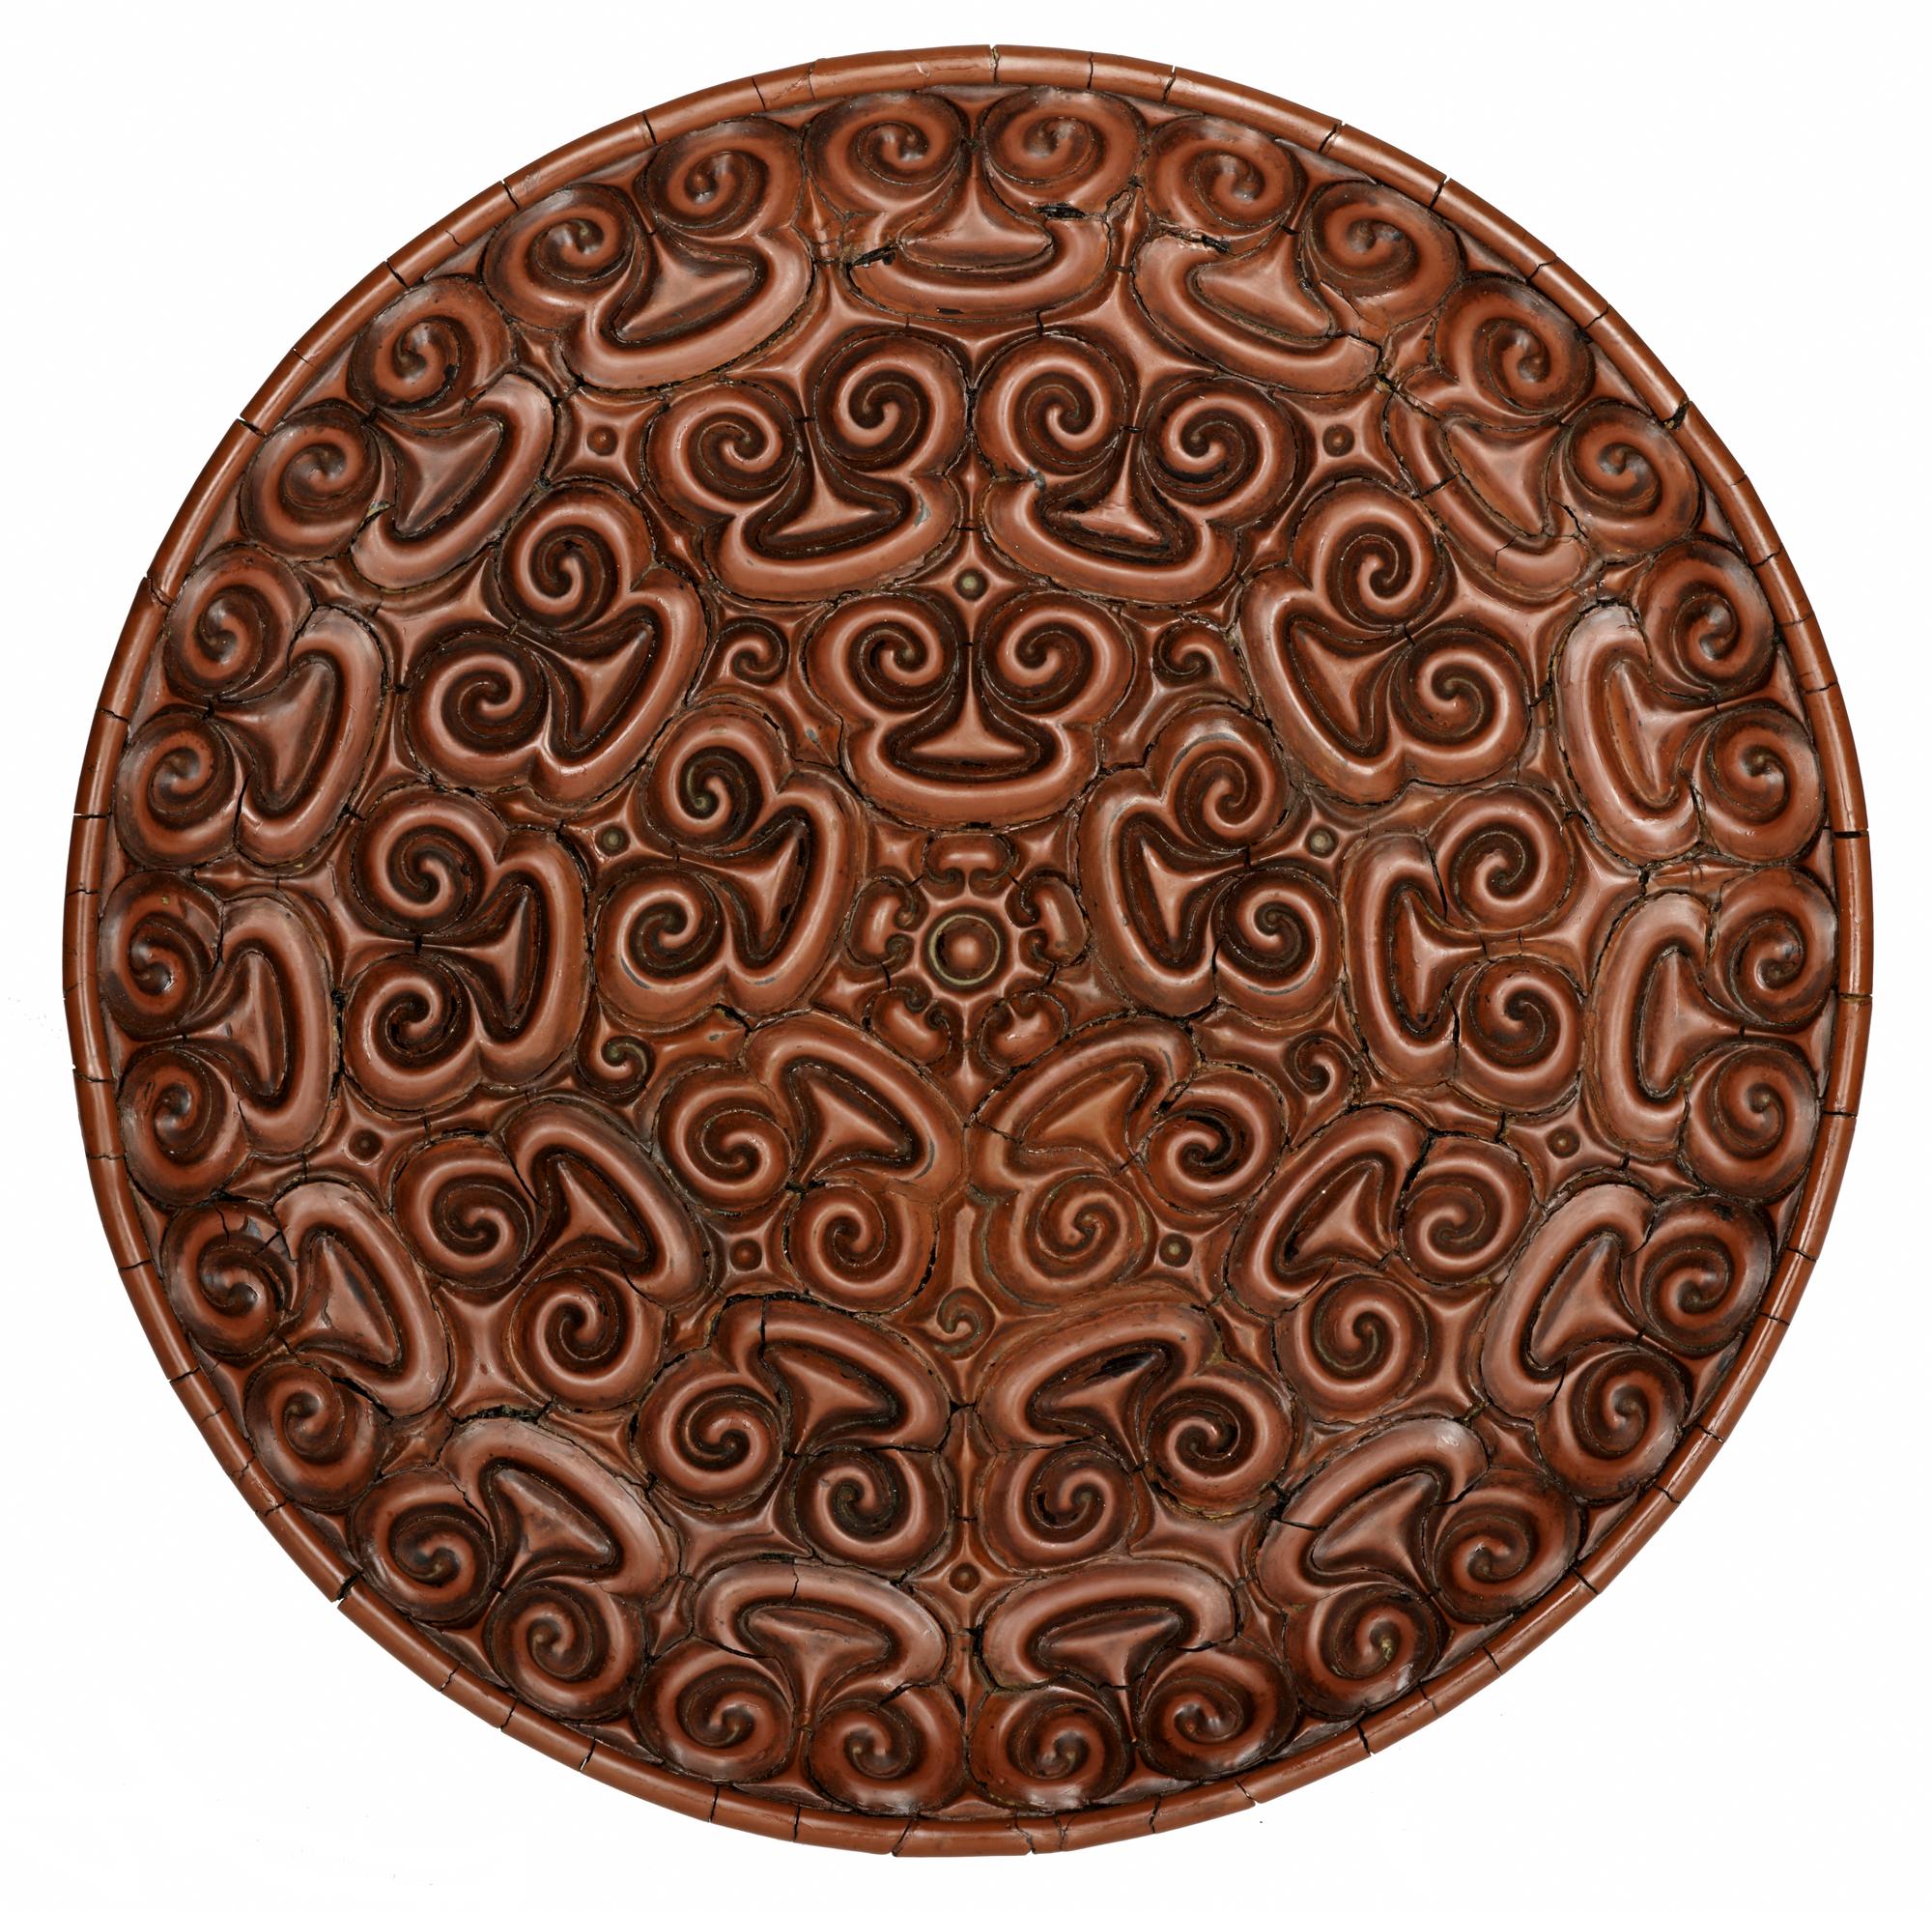 Circular dish of red lacquered wood carved on upper surface with three bands of spectacle-shaped designs surrounding a centre of petals and arrowhead patterns: China, Yuan dynasty, 14th century.